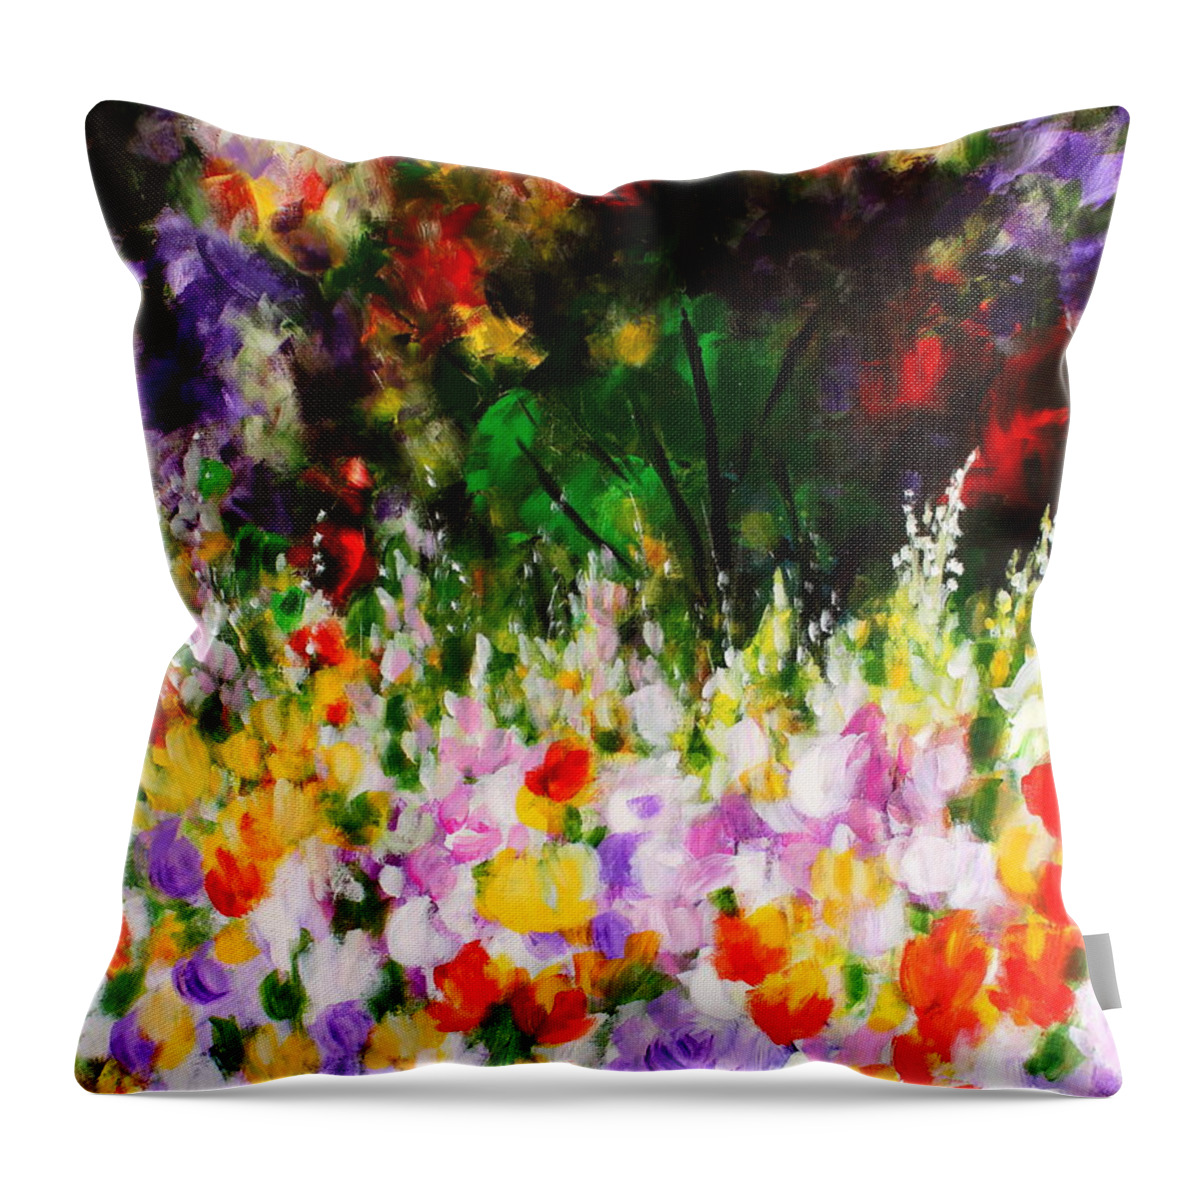 Floral Throw Pillow featuring the painting Heavenly Garden by Kume Bryant